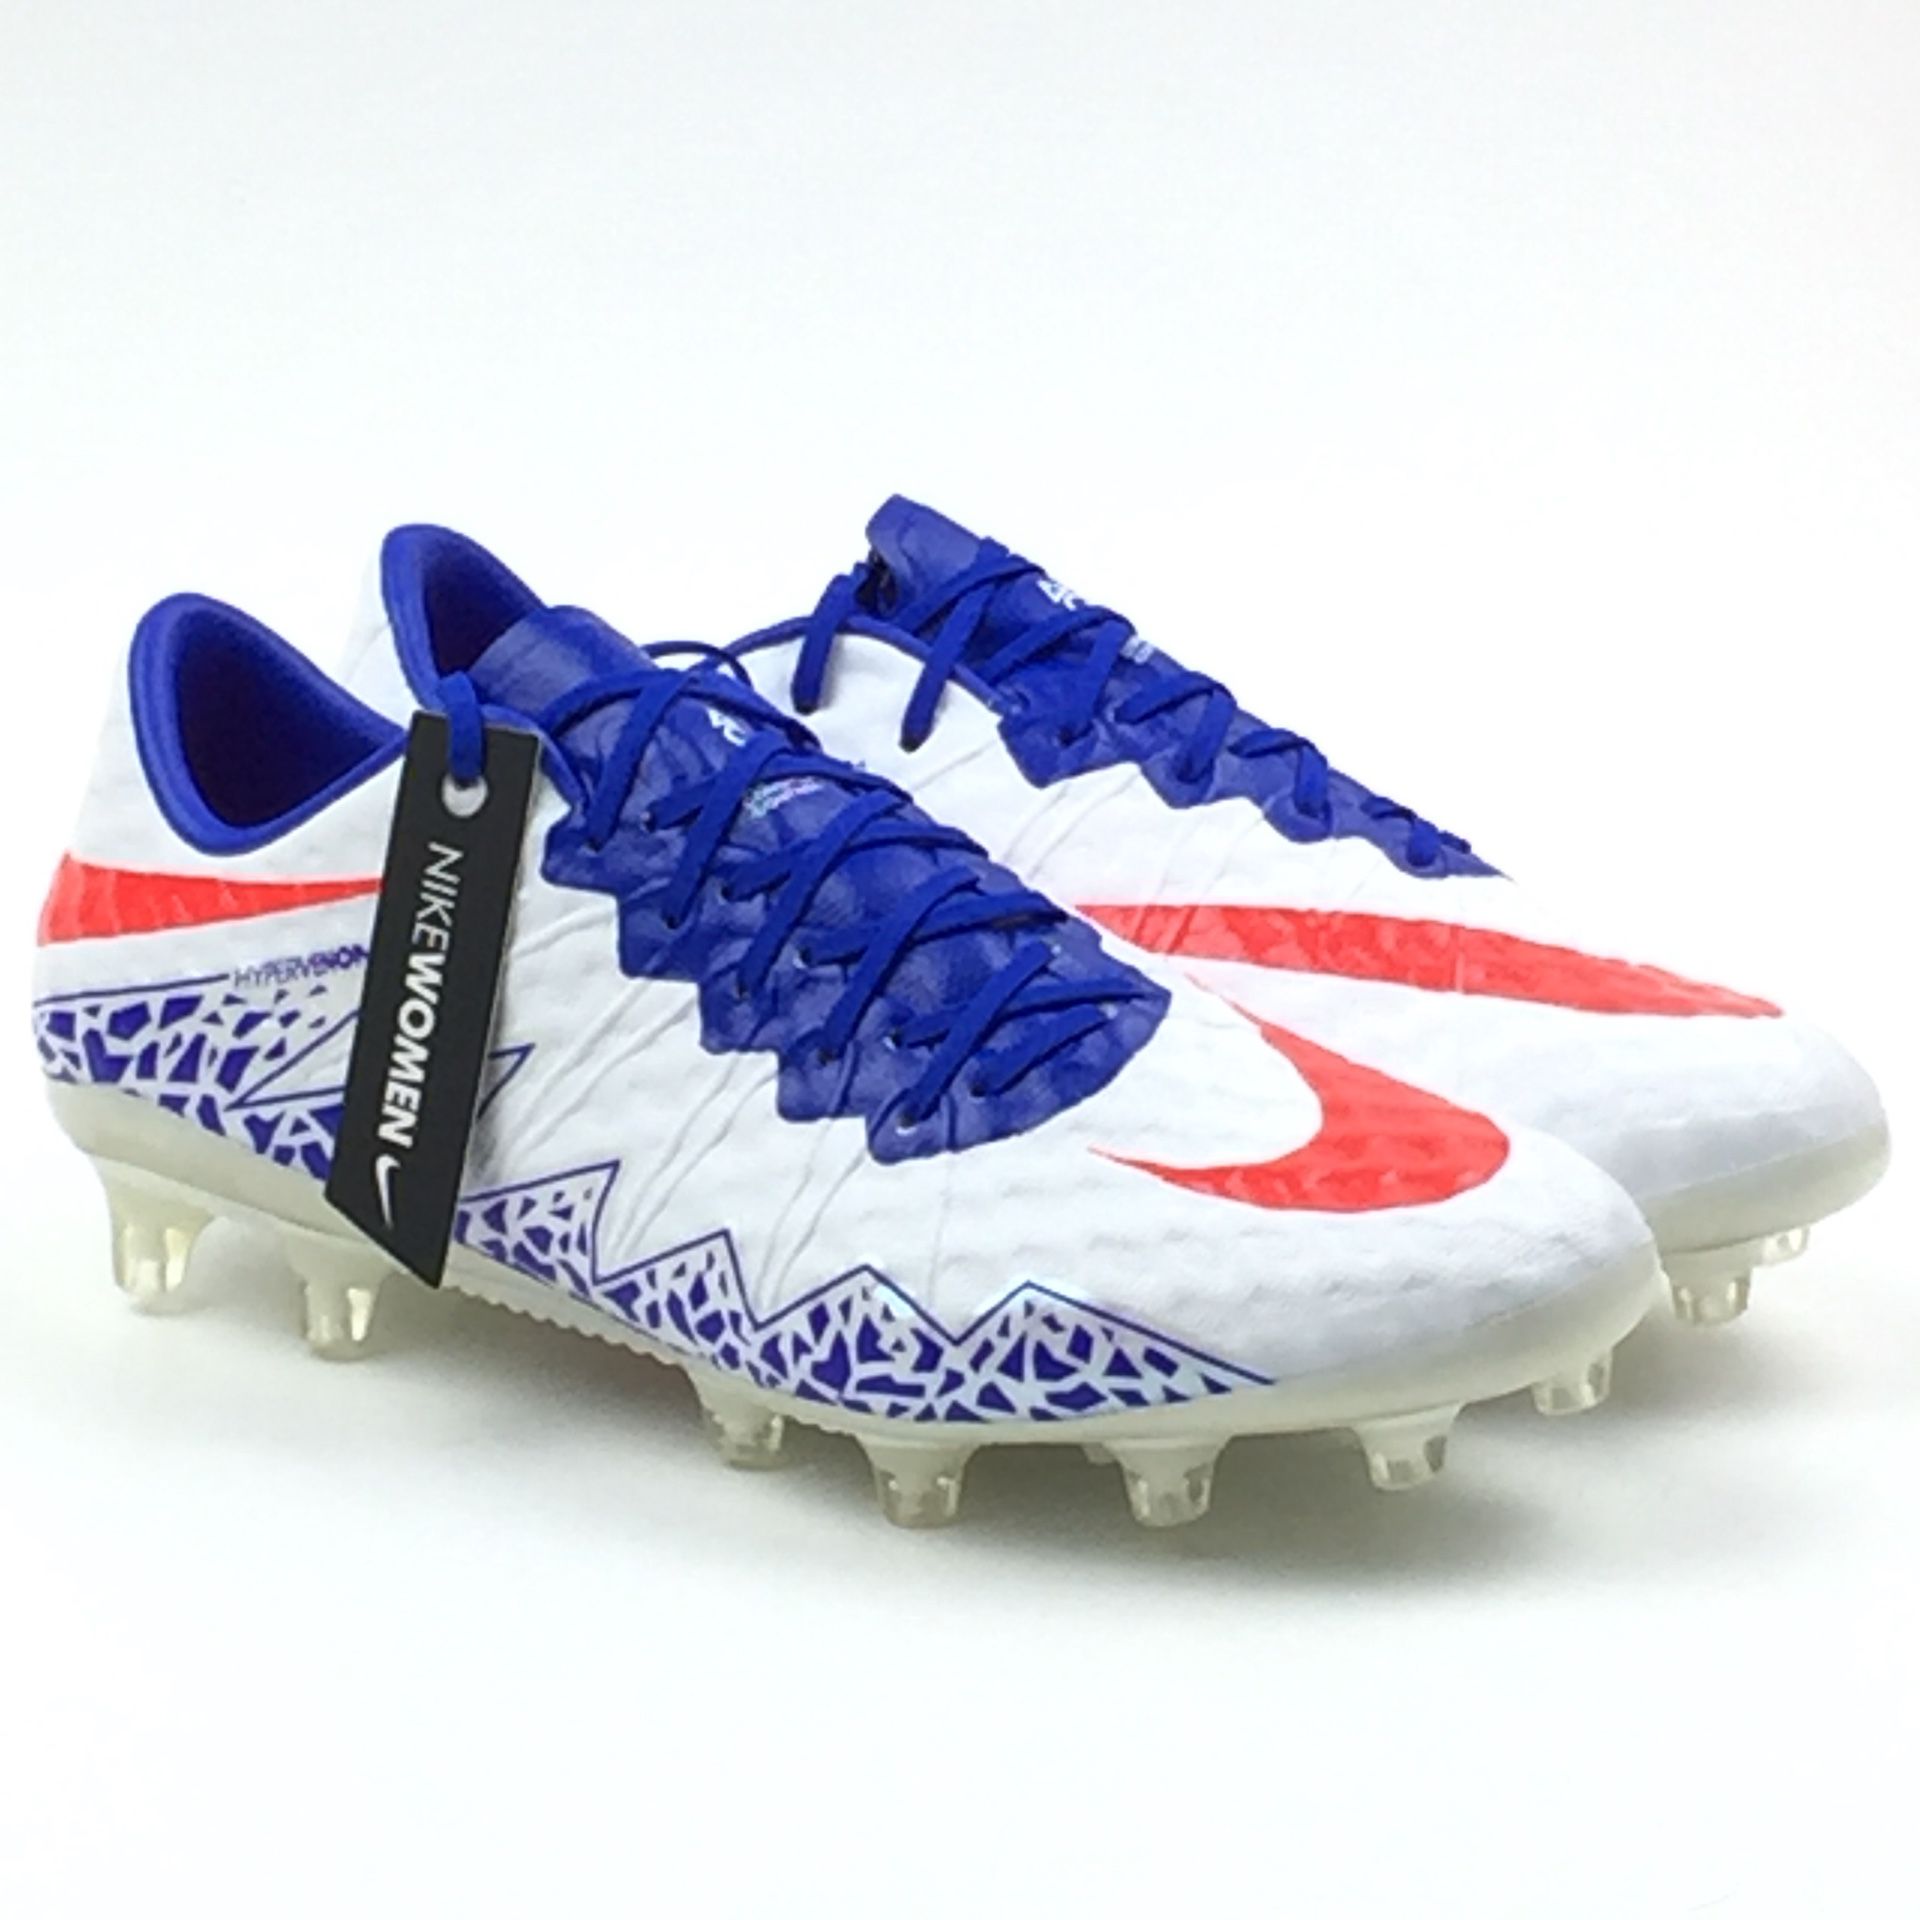 Discrepantie Lijkt op Kosten Nike Hypervenom Phinish FG ACC Womens Soccer Cleats Size 7.5 White  844268-164 other size available 9.5 for Sale in Riverside, CA - OfferUp